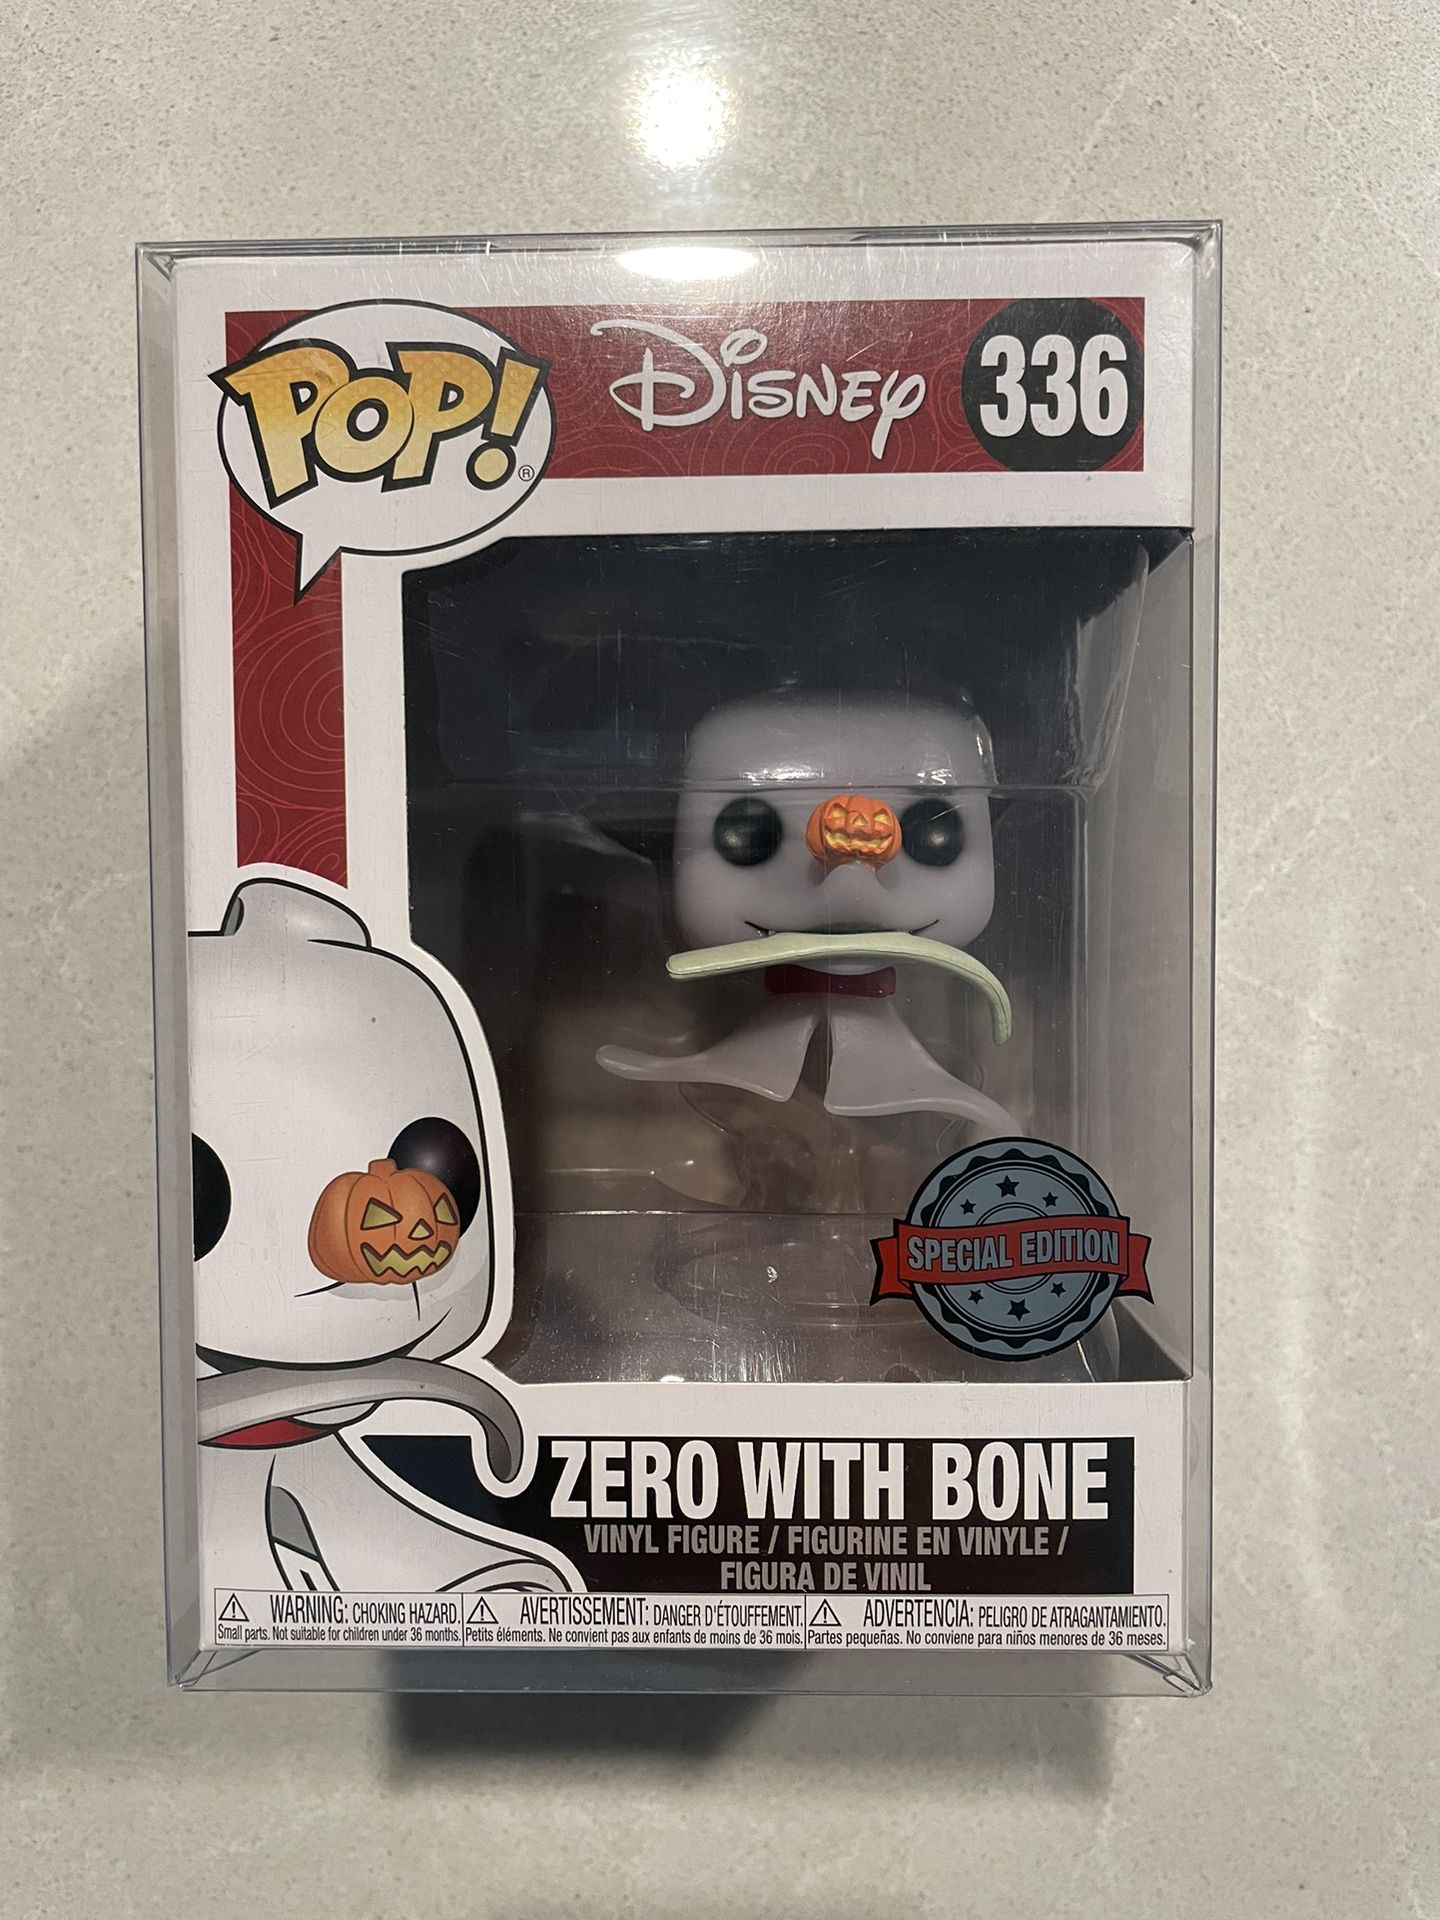 Zero with Bone Funko Pop *VAULTED* Box Lunch Special Edition Exclusive Disney Nightmare Before Christmas 336 with protector NBC Jack Skellington